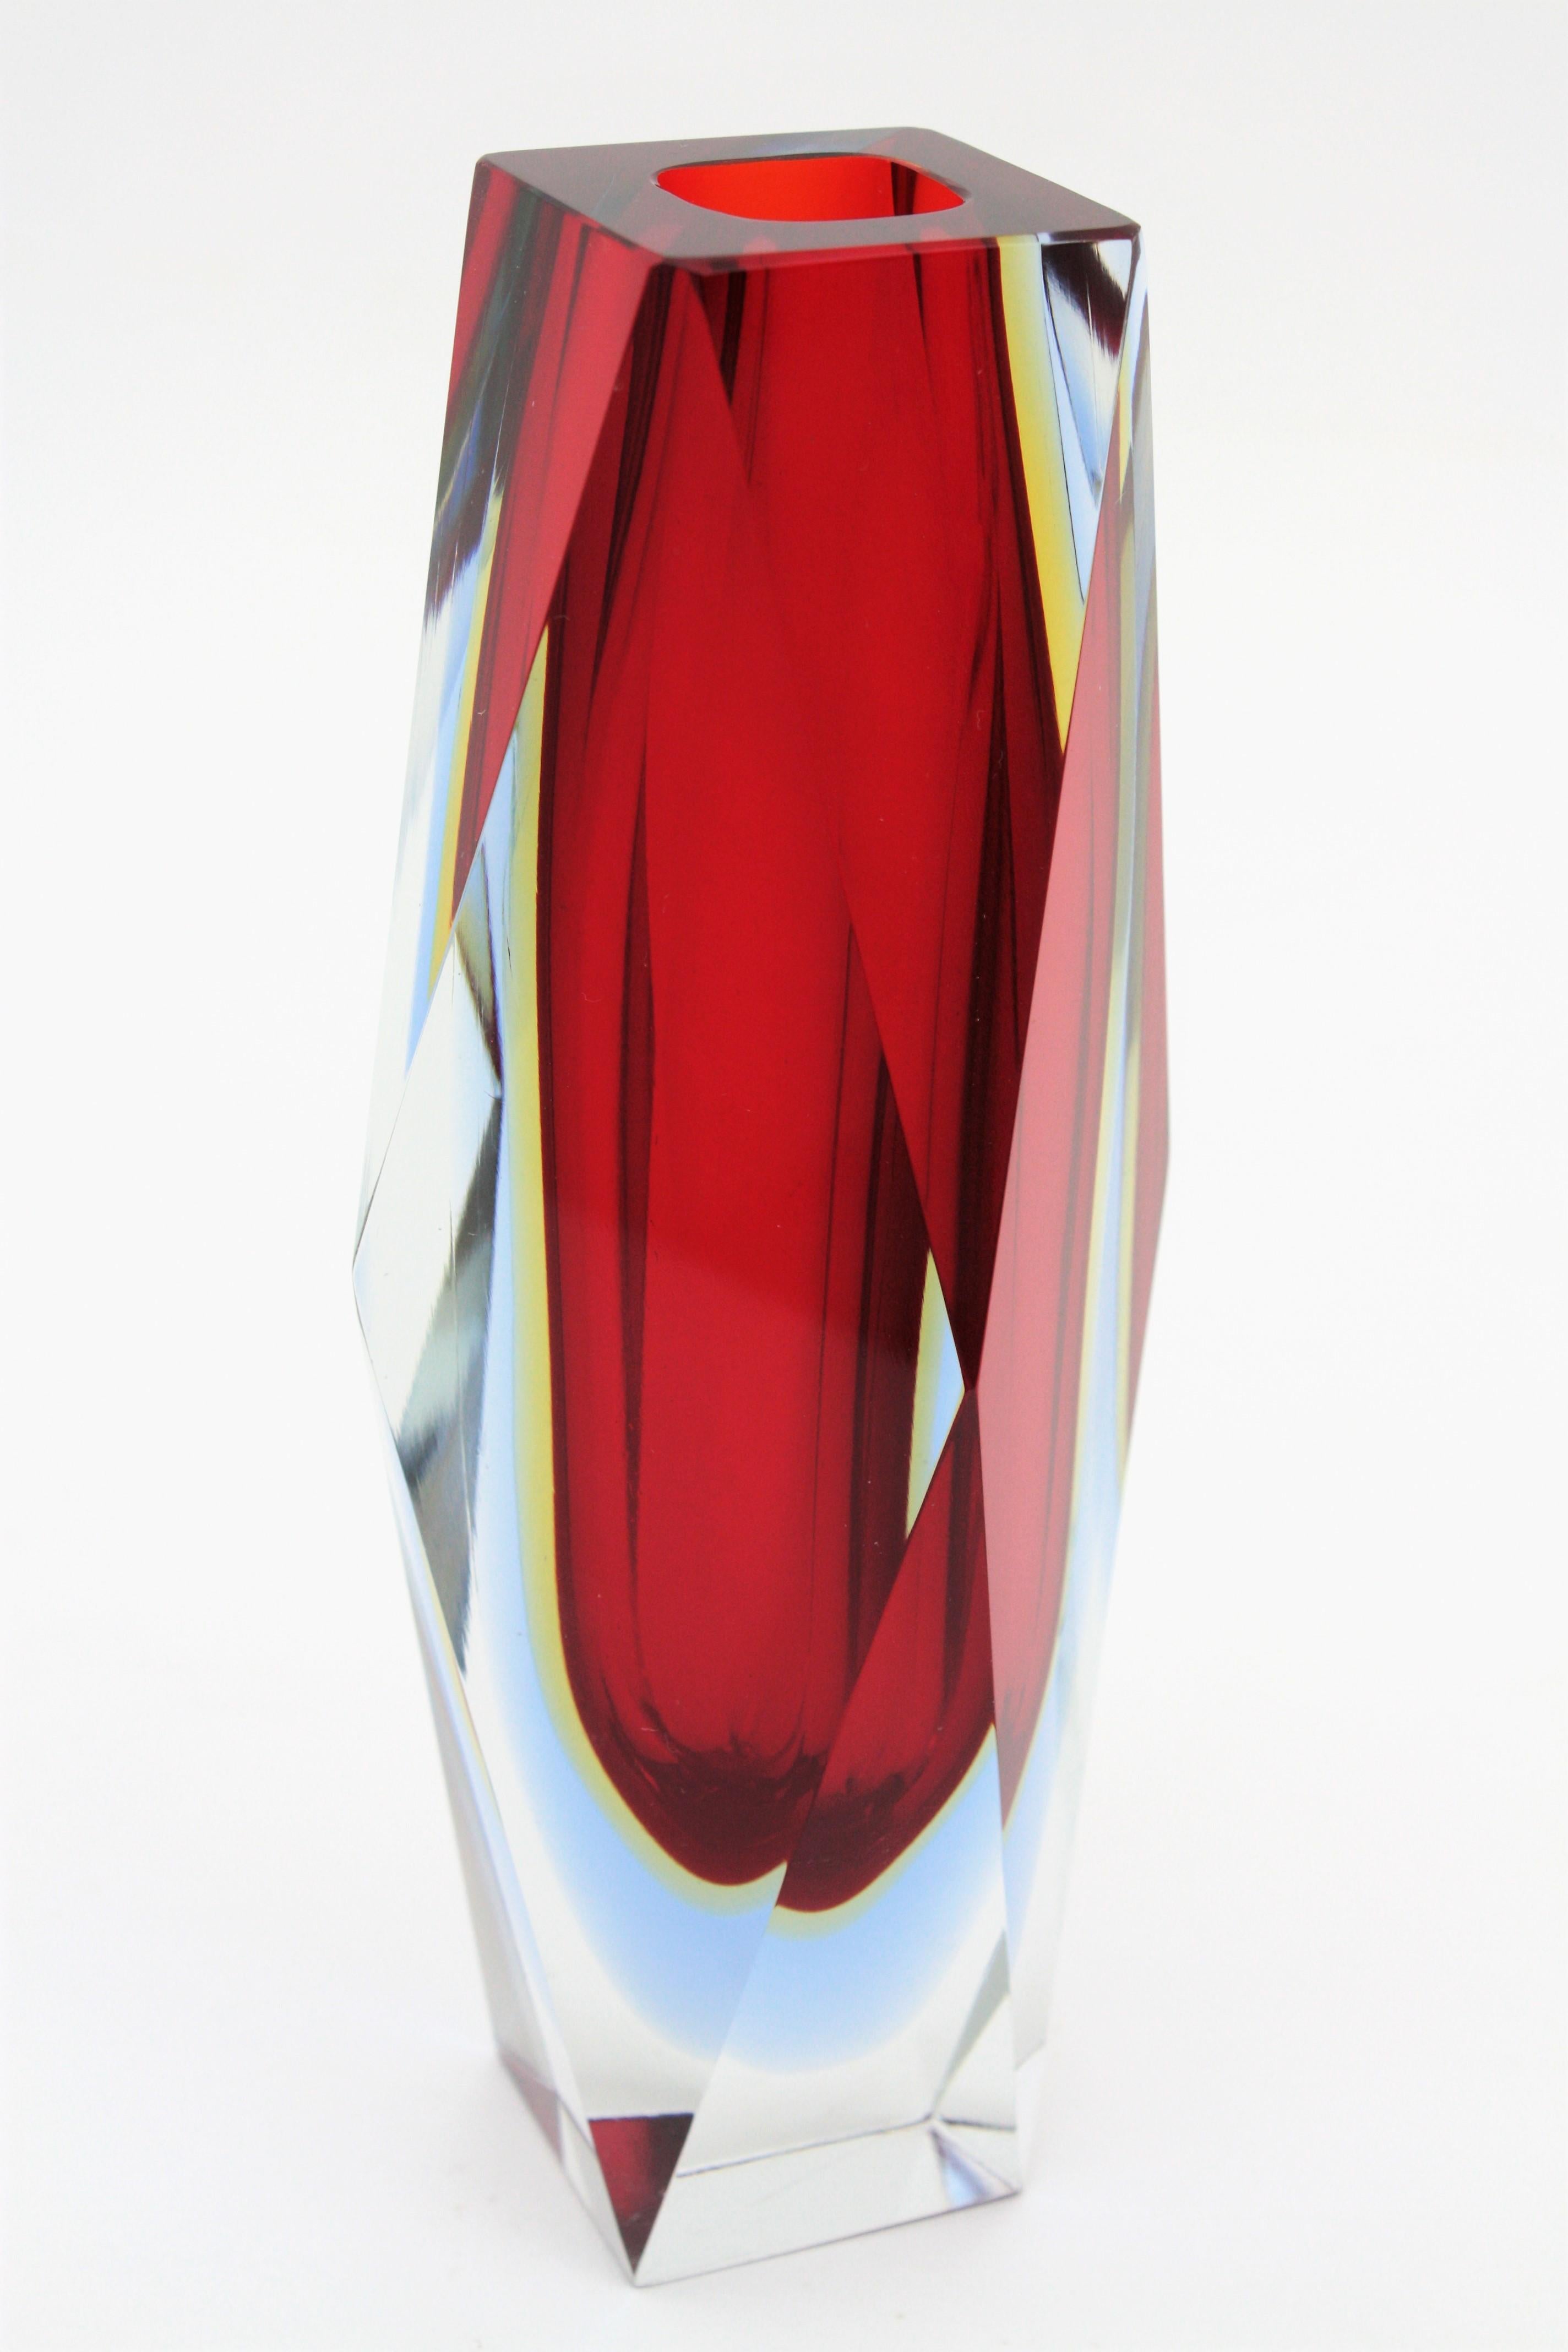 Mandruzzato Murano Sommerso Red, Blue, Yellow & Clear Faceted Glass Vase, 1960s For Sale 3